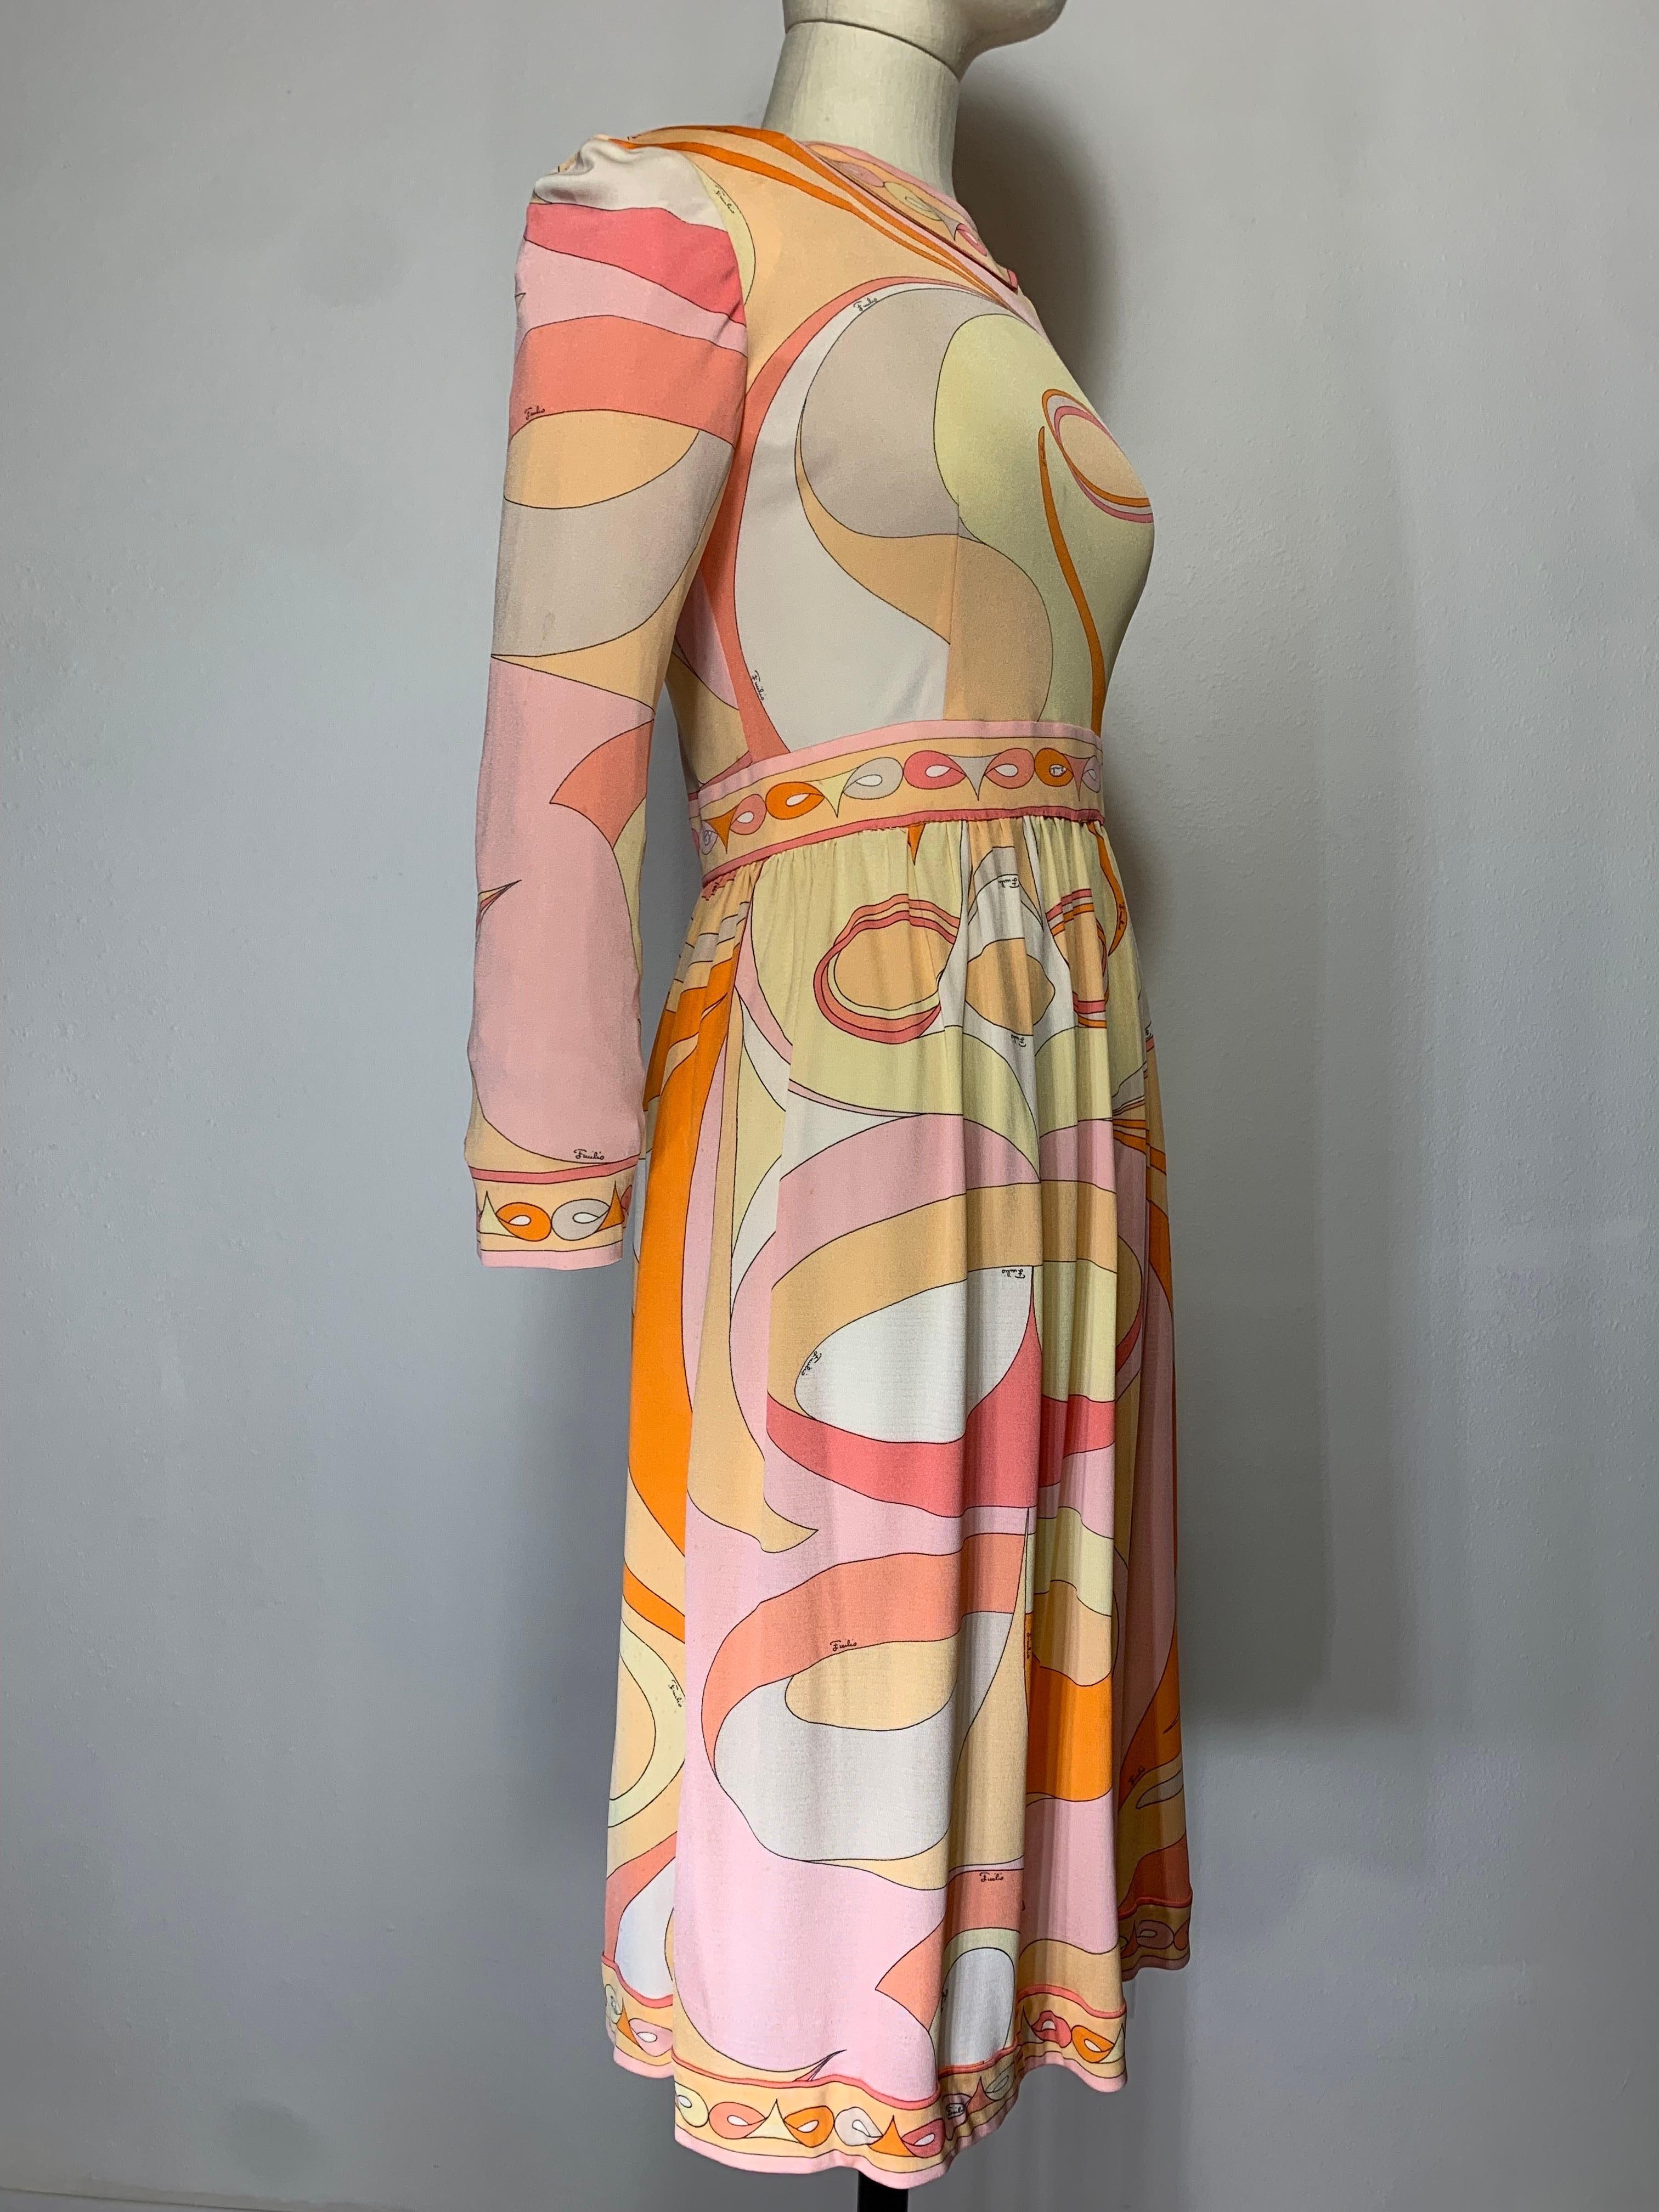 1960s Emilio Pucci Psychedelic Print Mod Day Dress w Full Skirt in Tangerine  For Sale 4